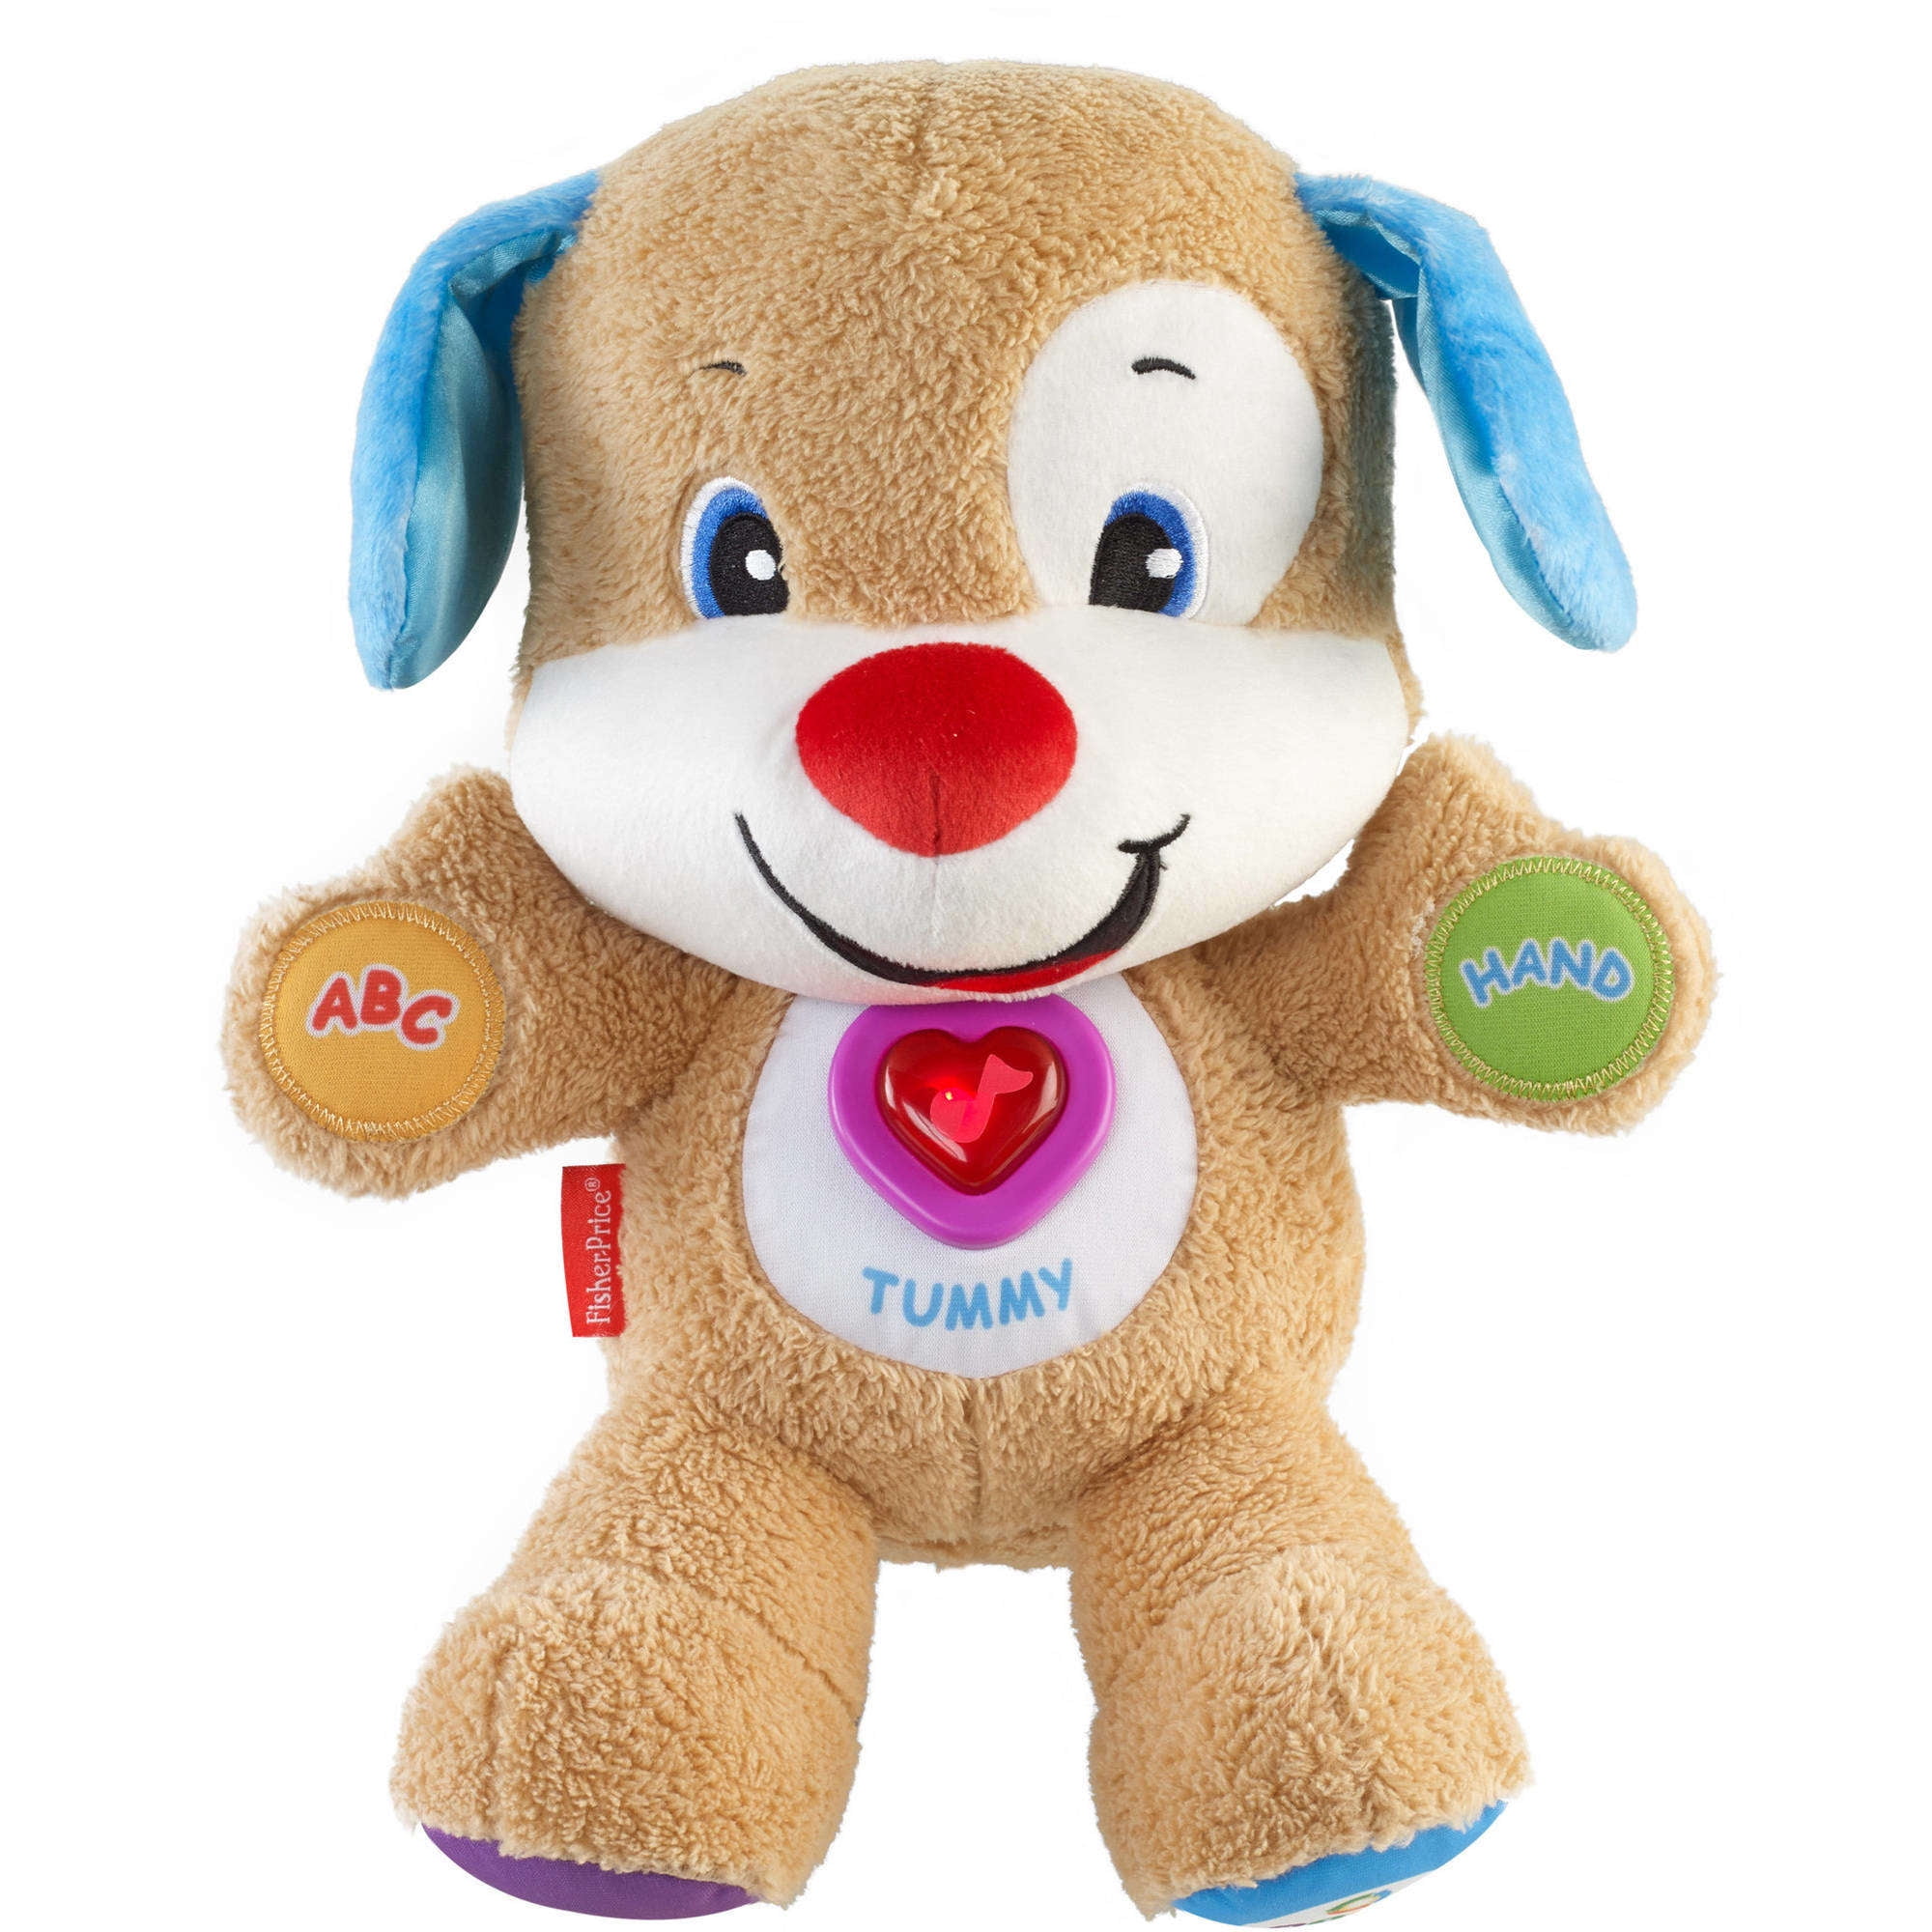 Fisher Price Smart Stages Puppy - Tesco Groceries